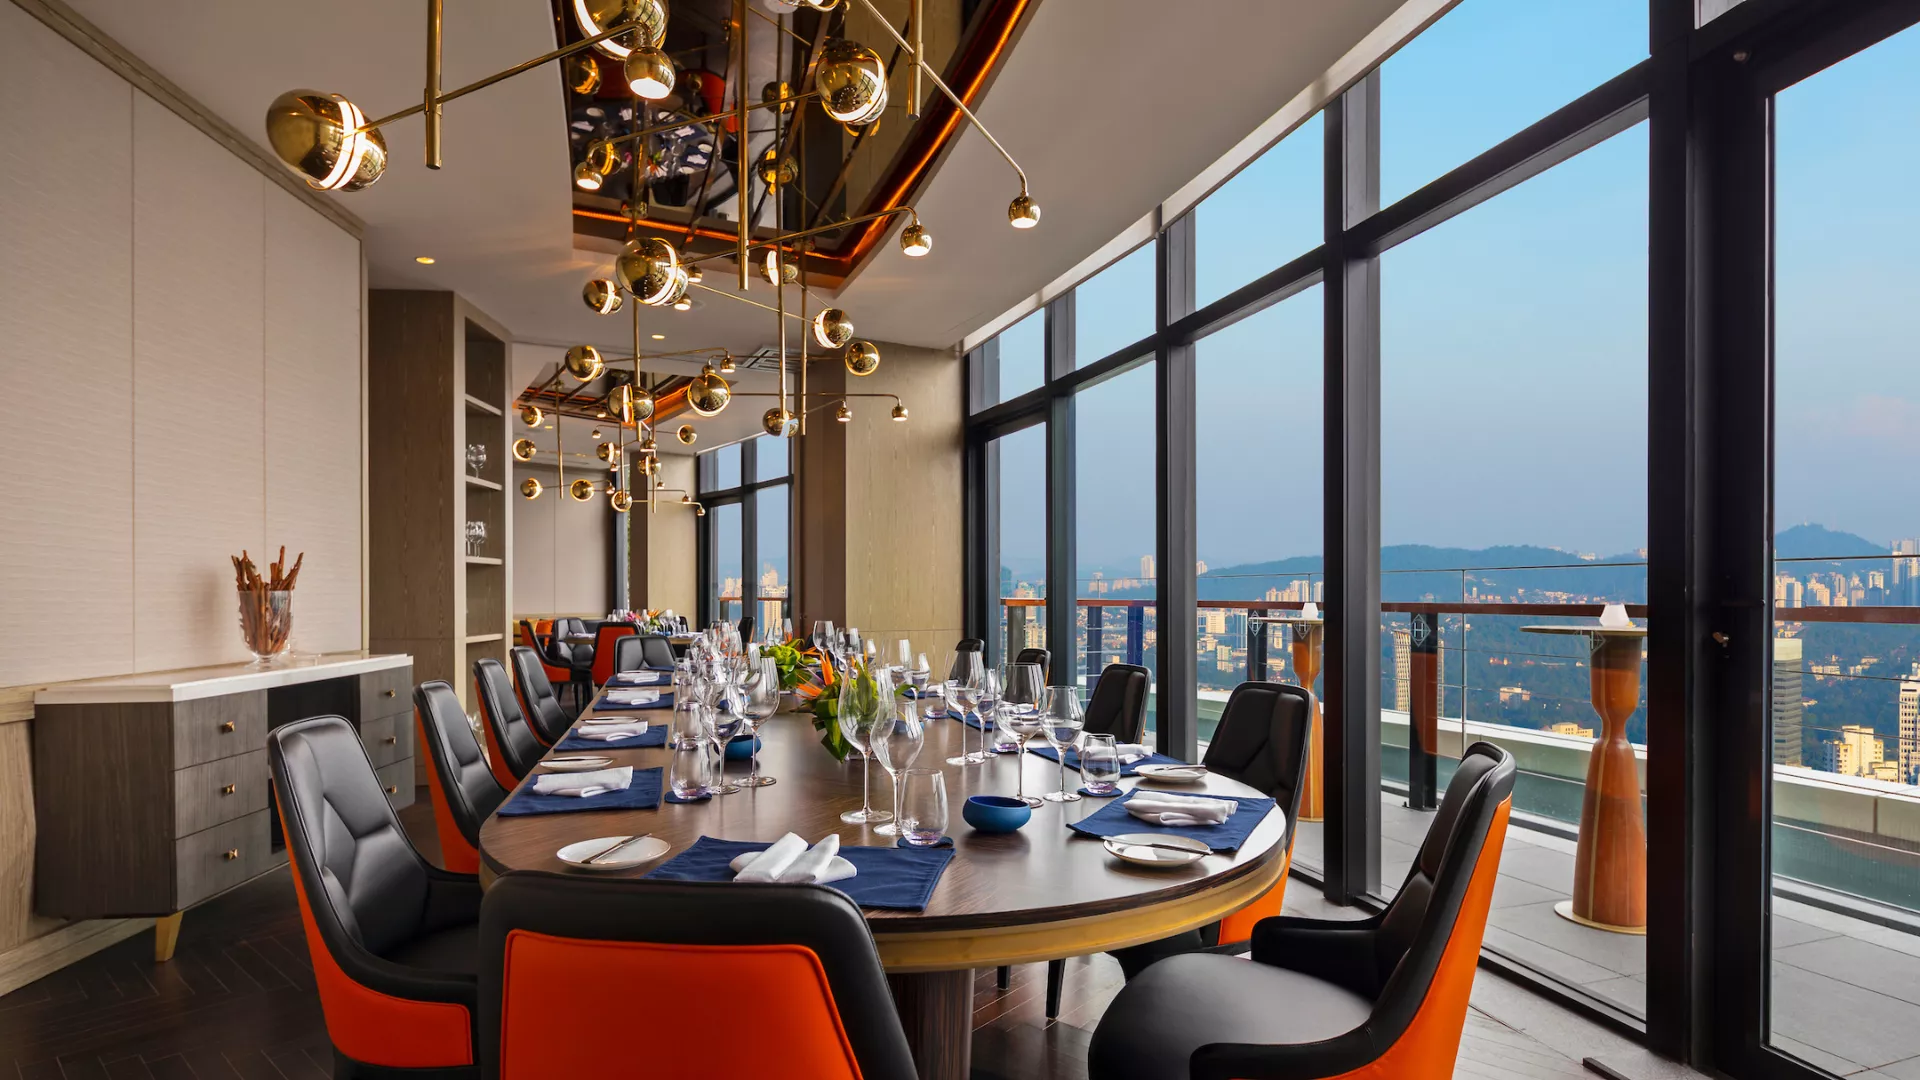 Horizon Grill in Malaysia, East Asia | Observation Decks,Bars - Rated 0.8